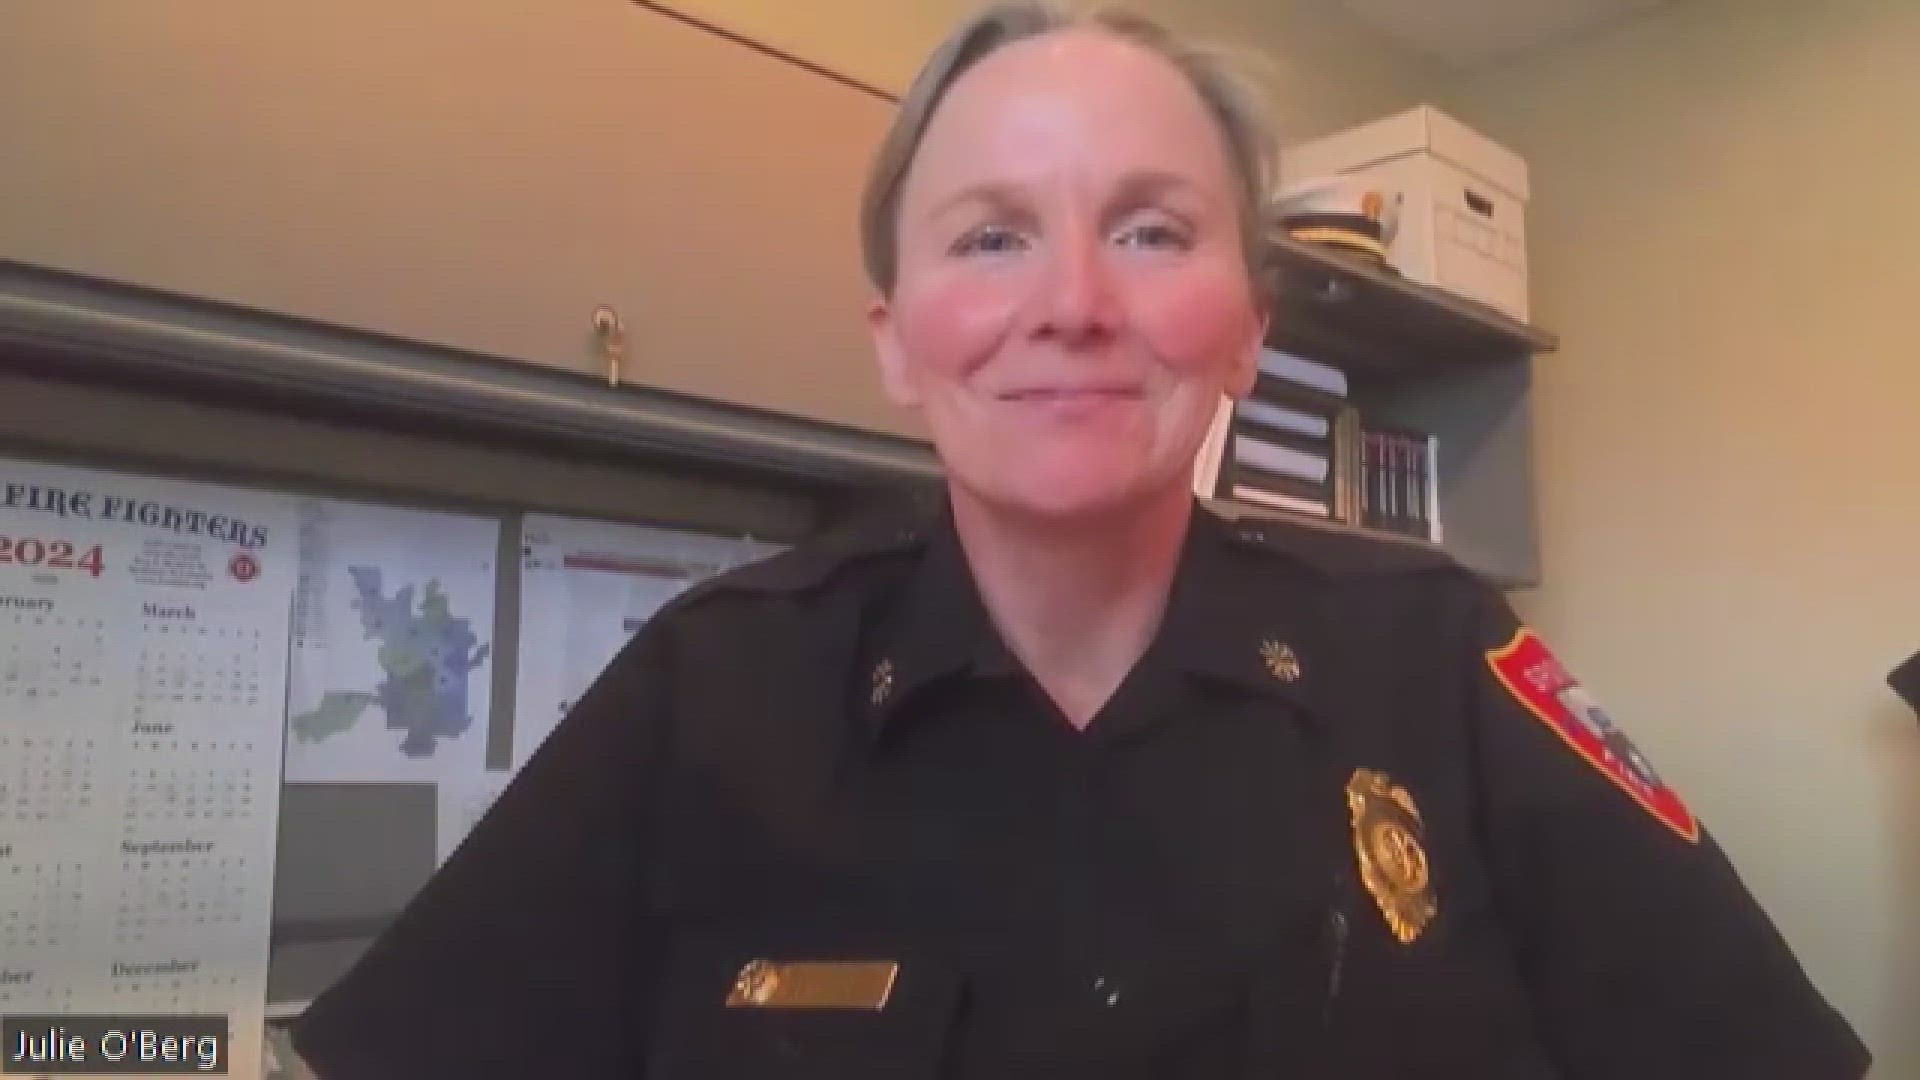 Julie O'Berg has been serving as the interim fire chief since January 2024 and is the first woman appointed to lead the department.